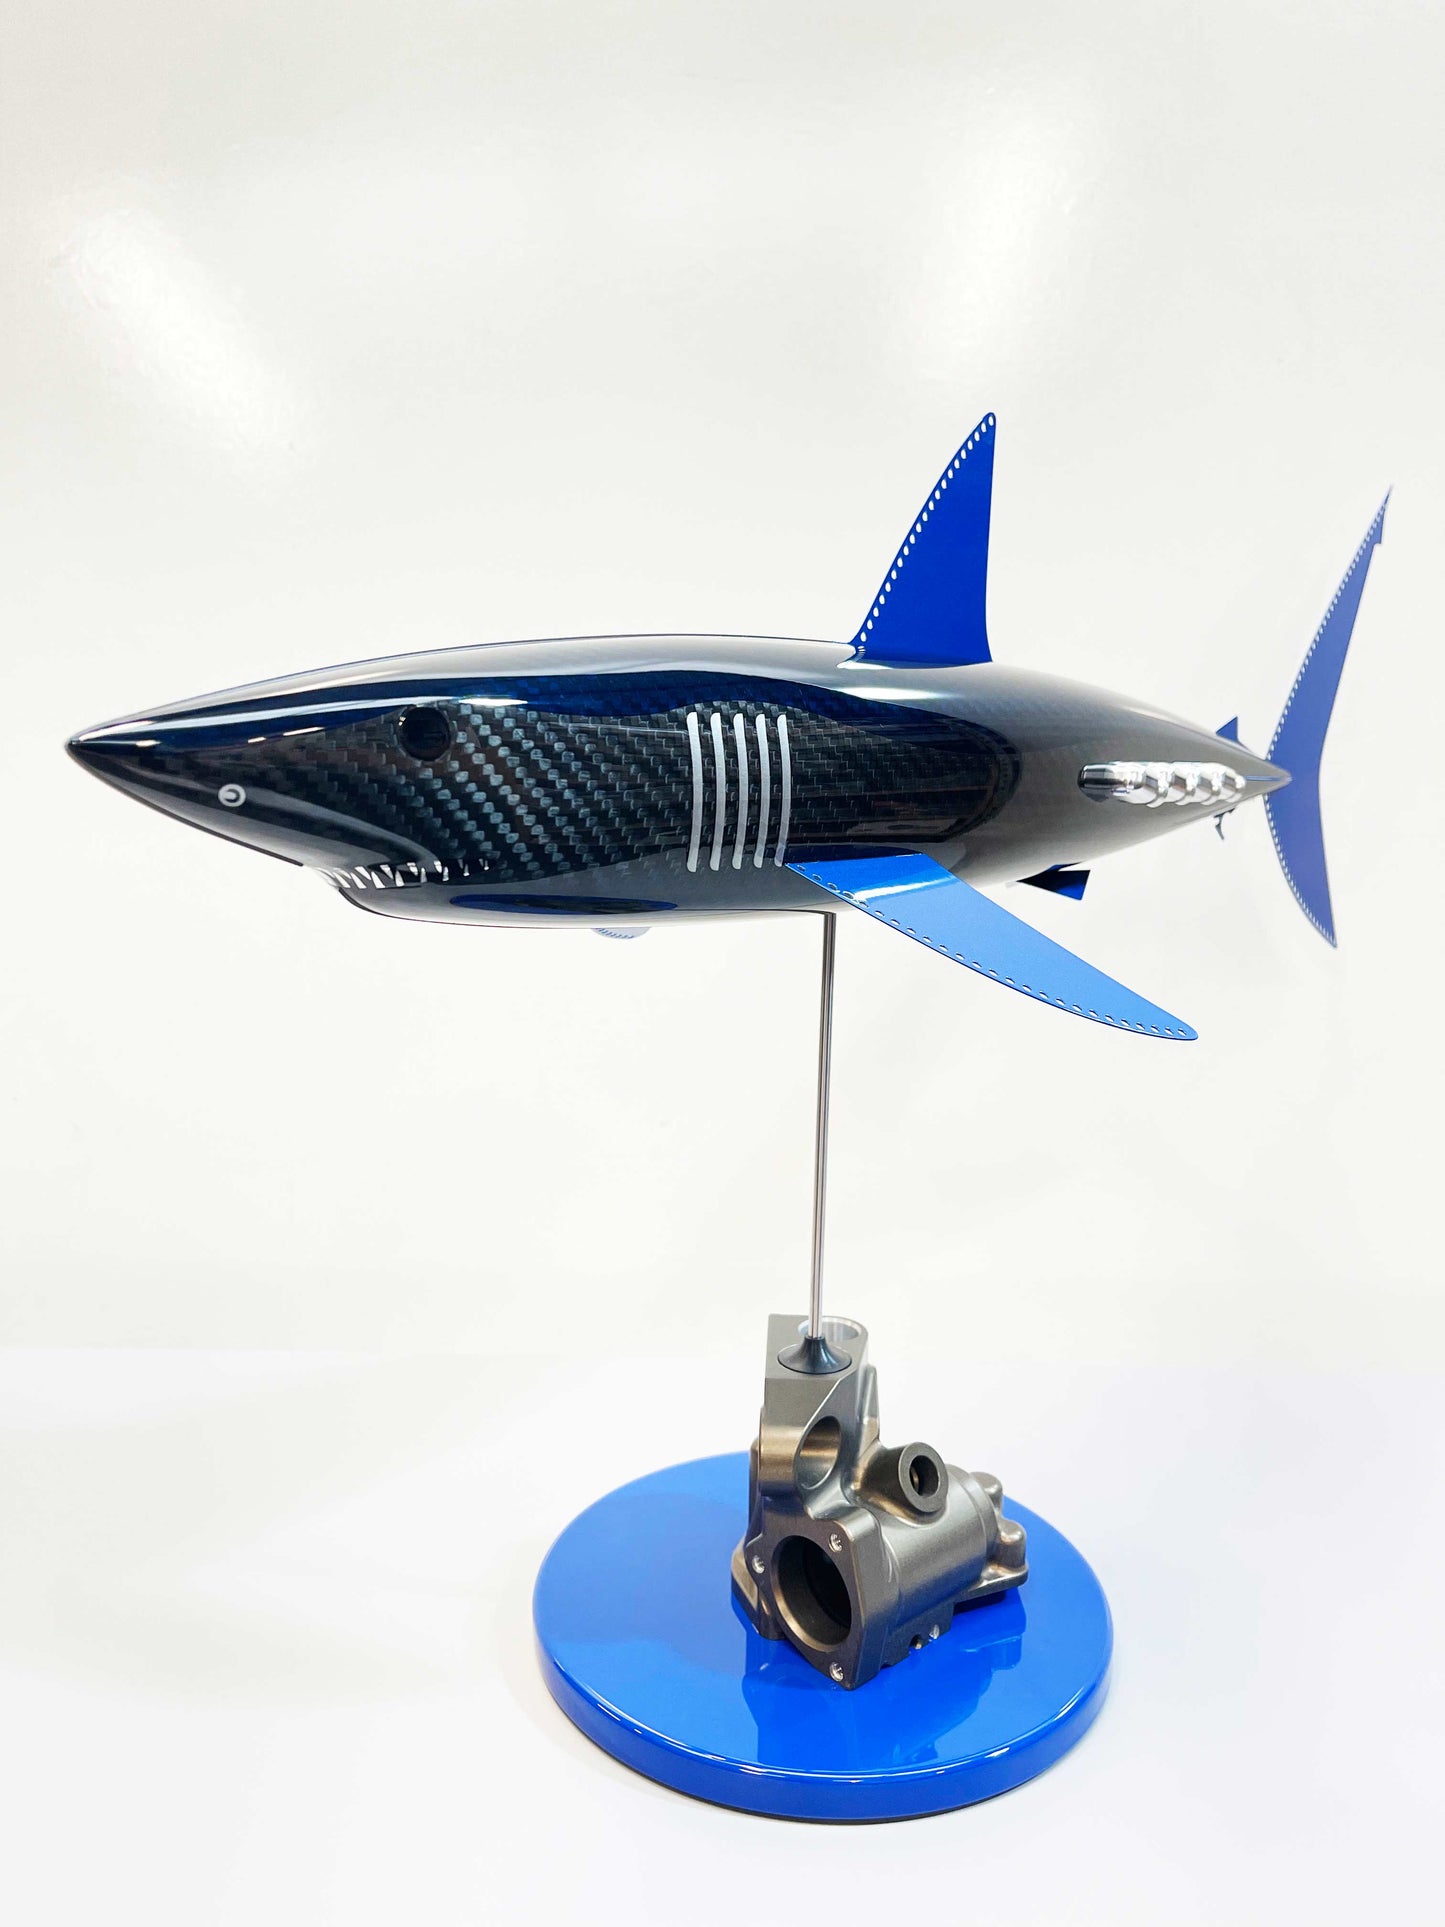 Blue tinted carbon fibre Mako Shark Pup with blue fins and blue base